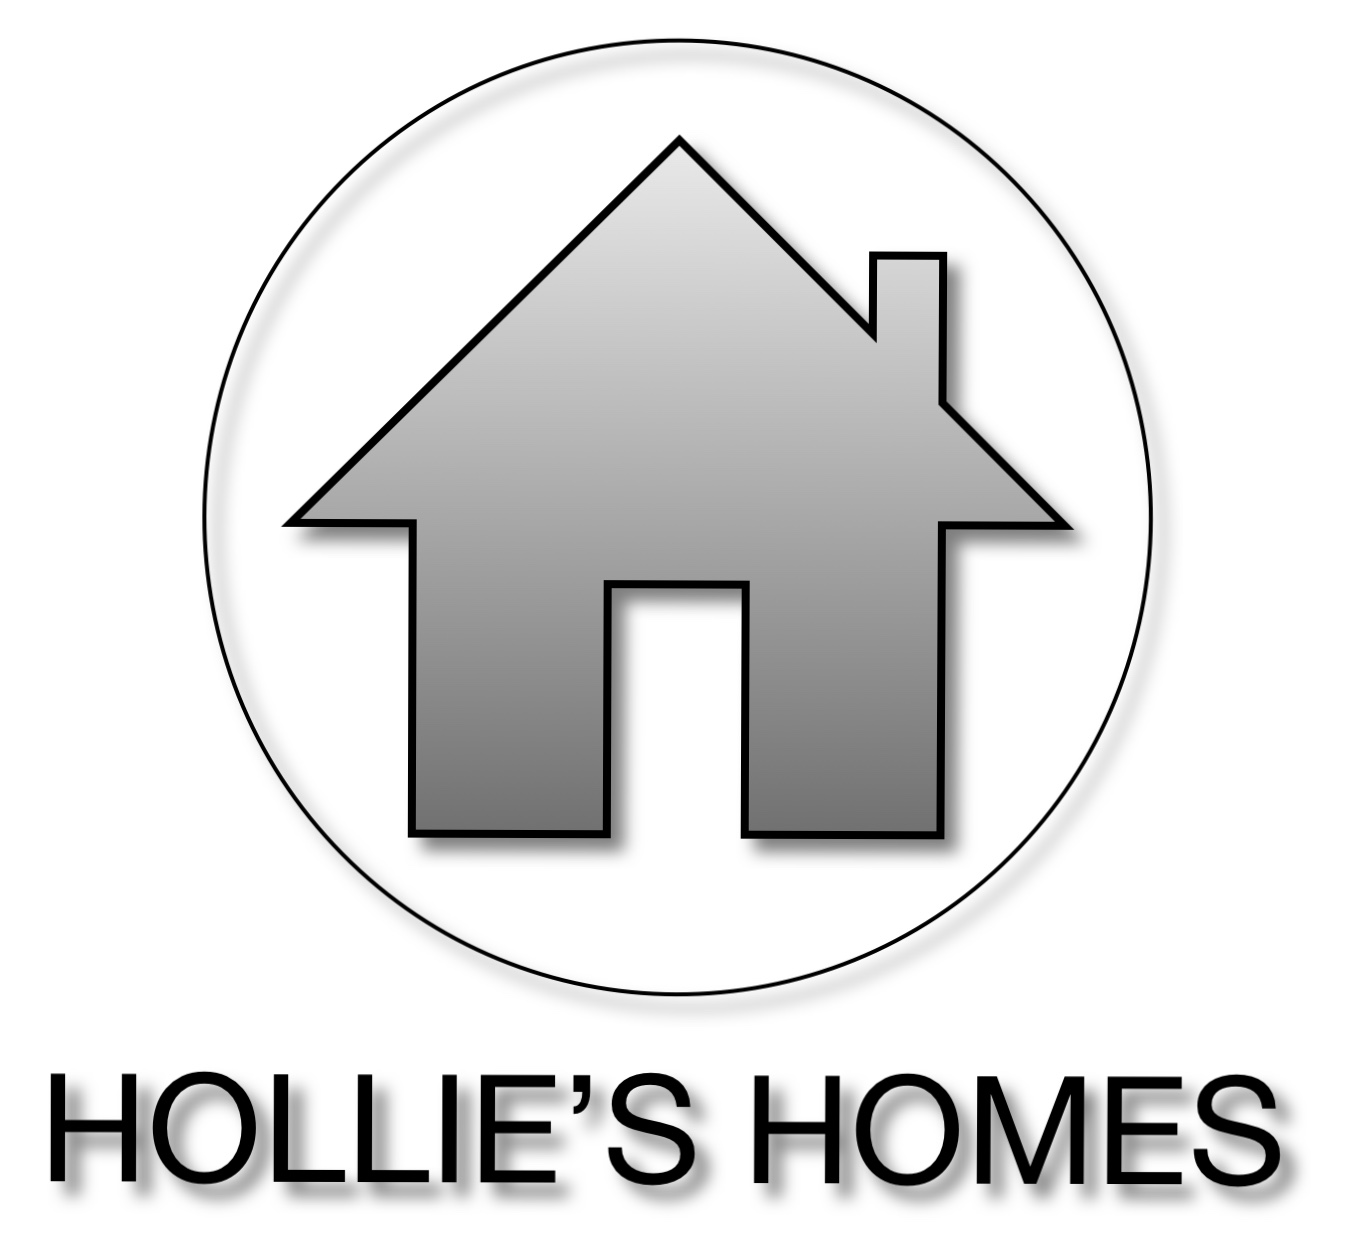 Hollies Homes Electrical Division